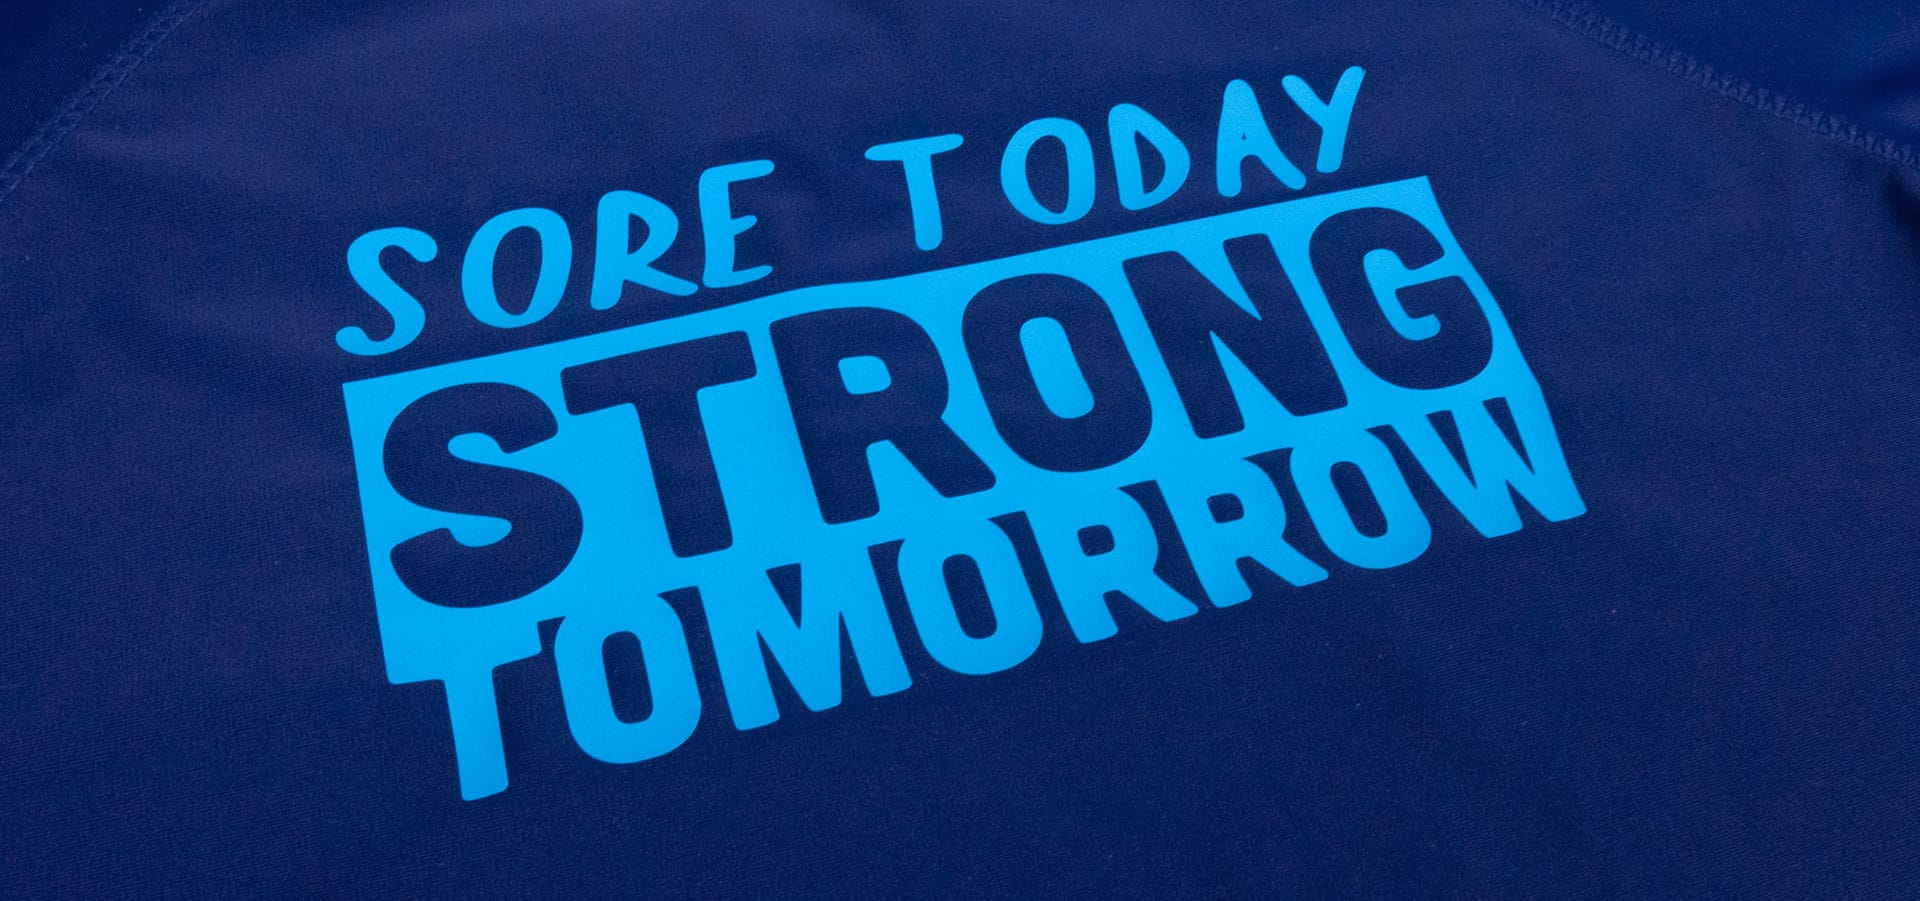 A sports shirt reading "Sore Today Strong Tomorrow" in Columbia Blue ThermoFlex Xtra